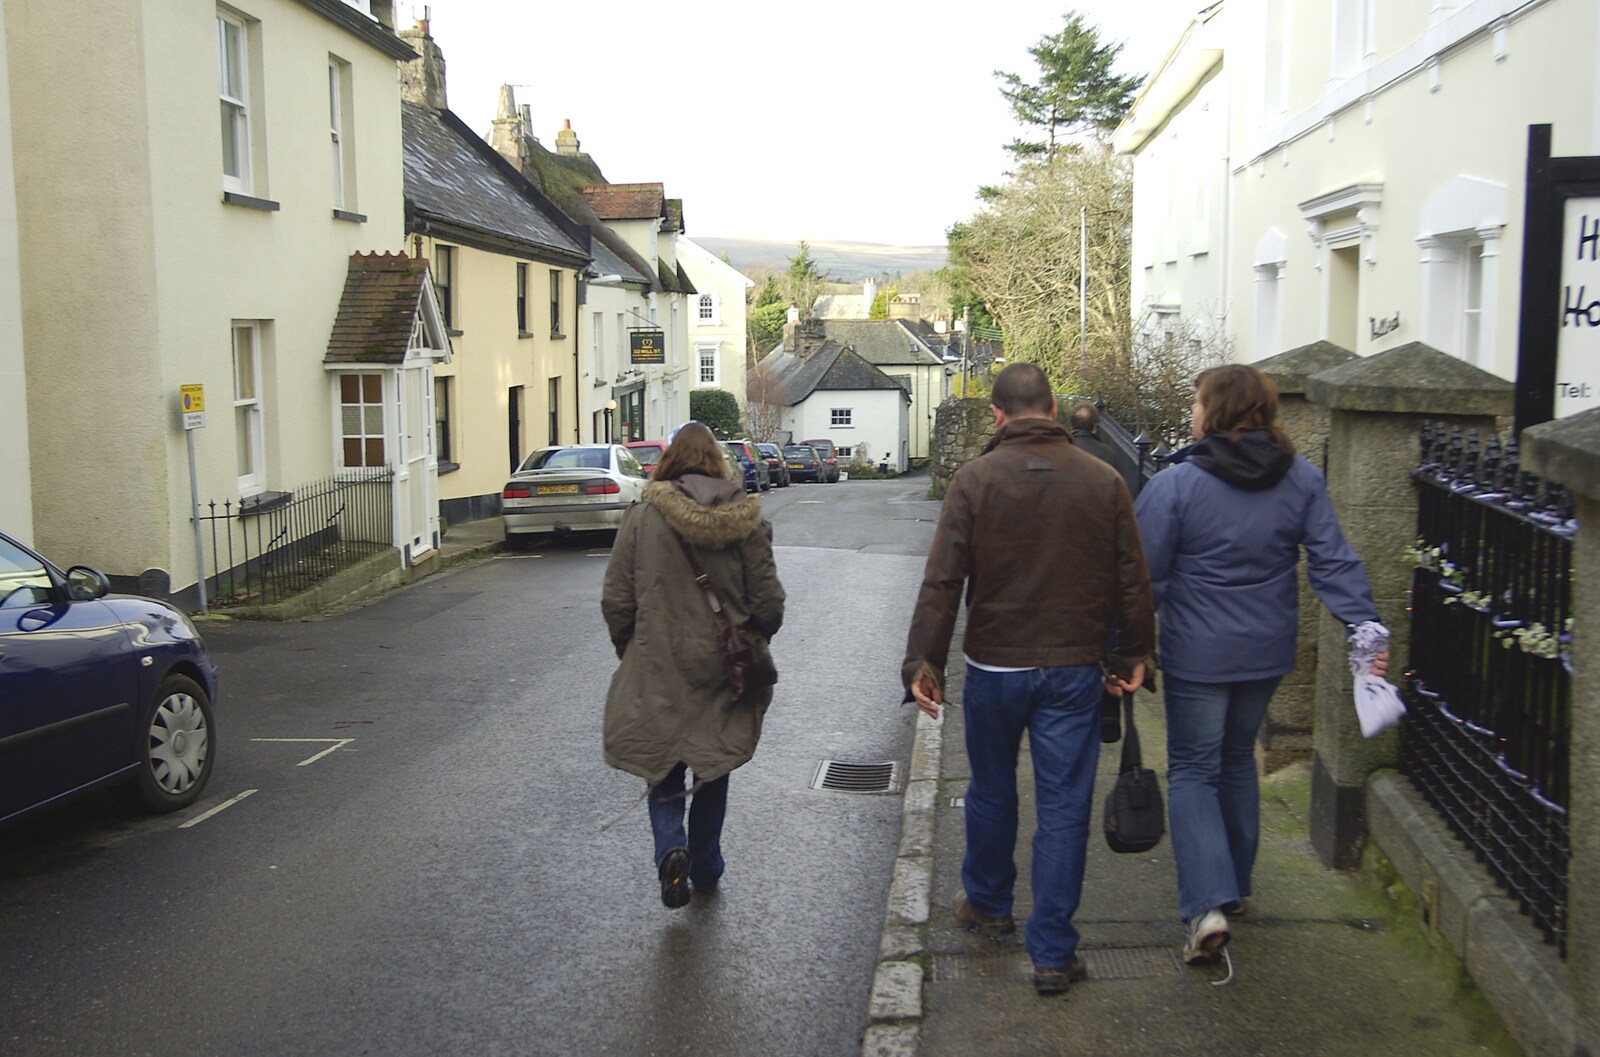 We head back towards the flat, after a beer in the pub from A Boxing Day Hunt, Chagford, Devon - 26th December 2007